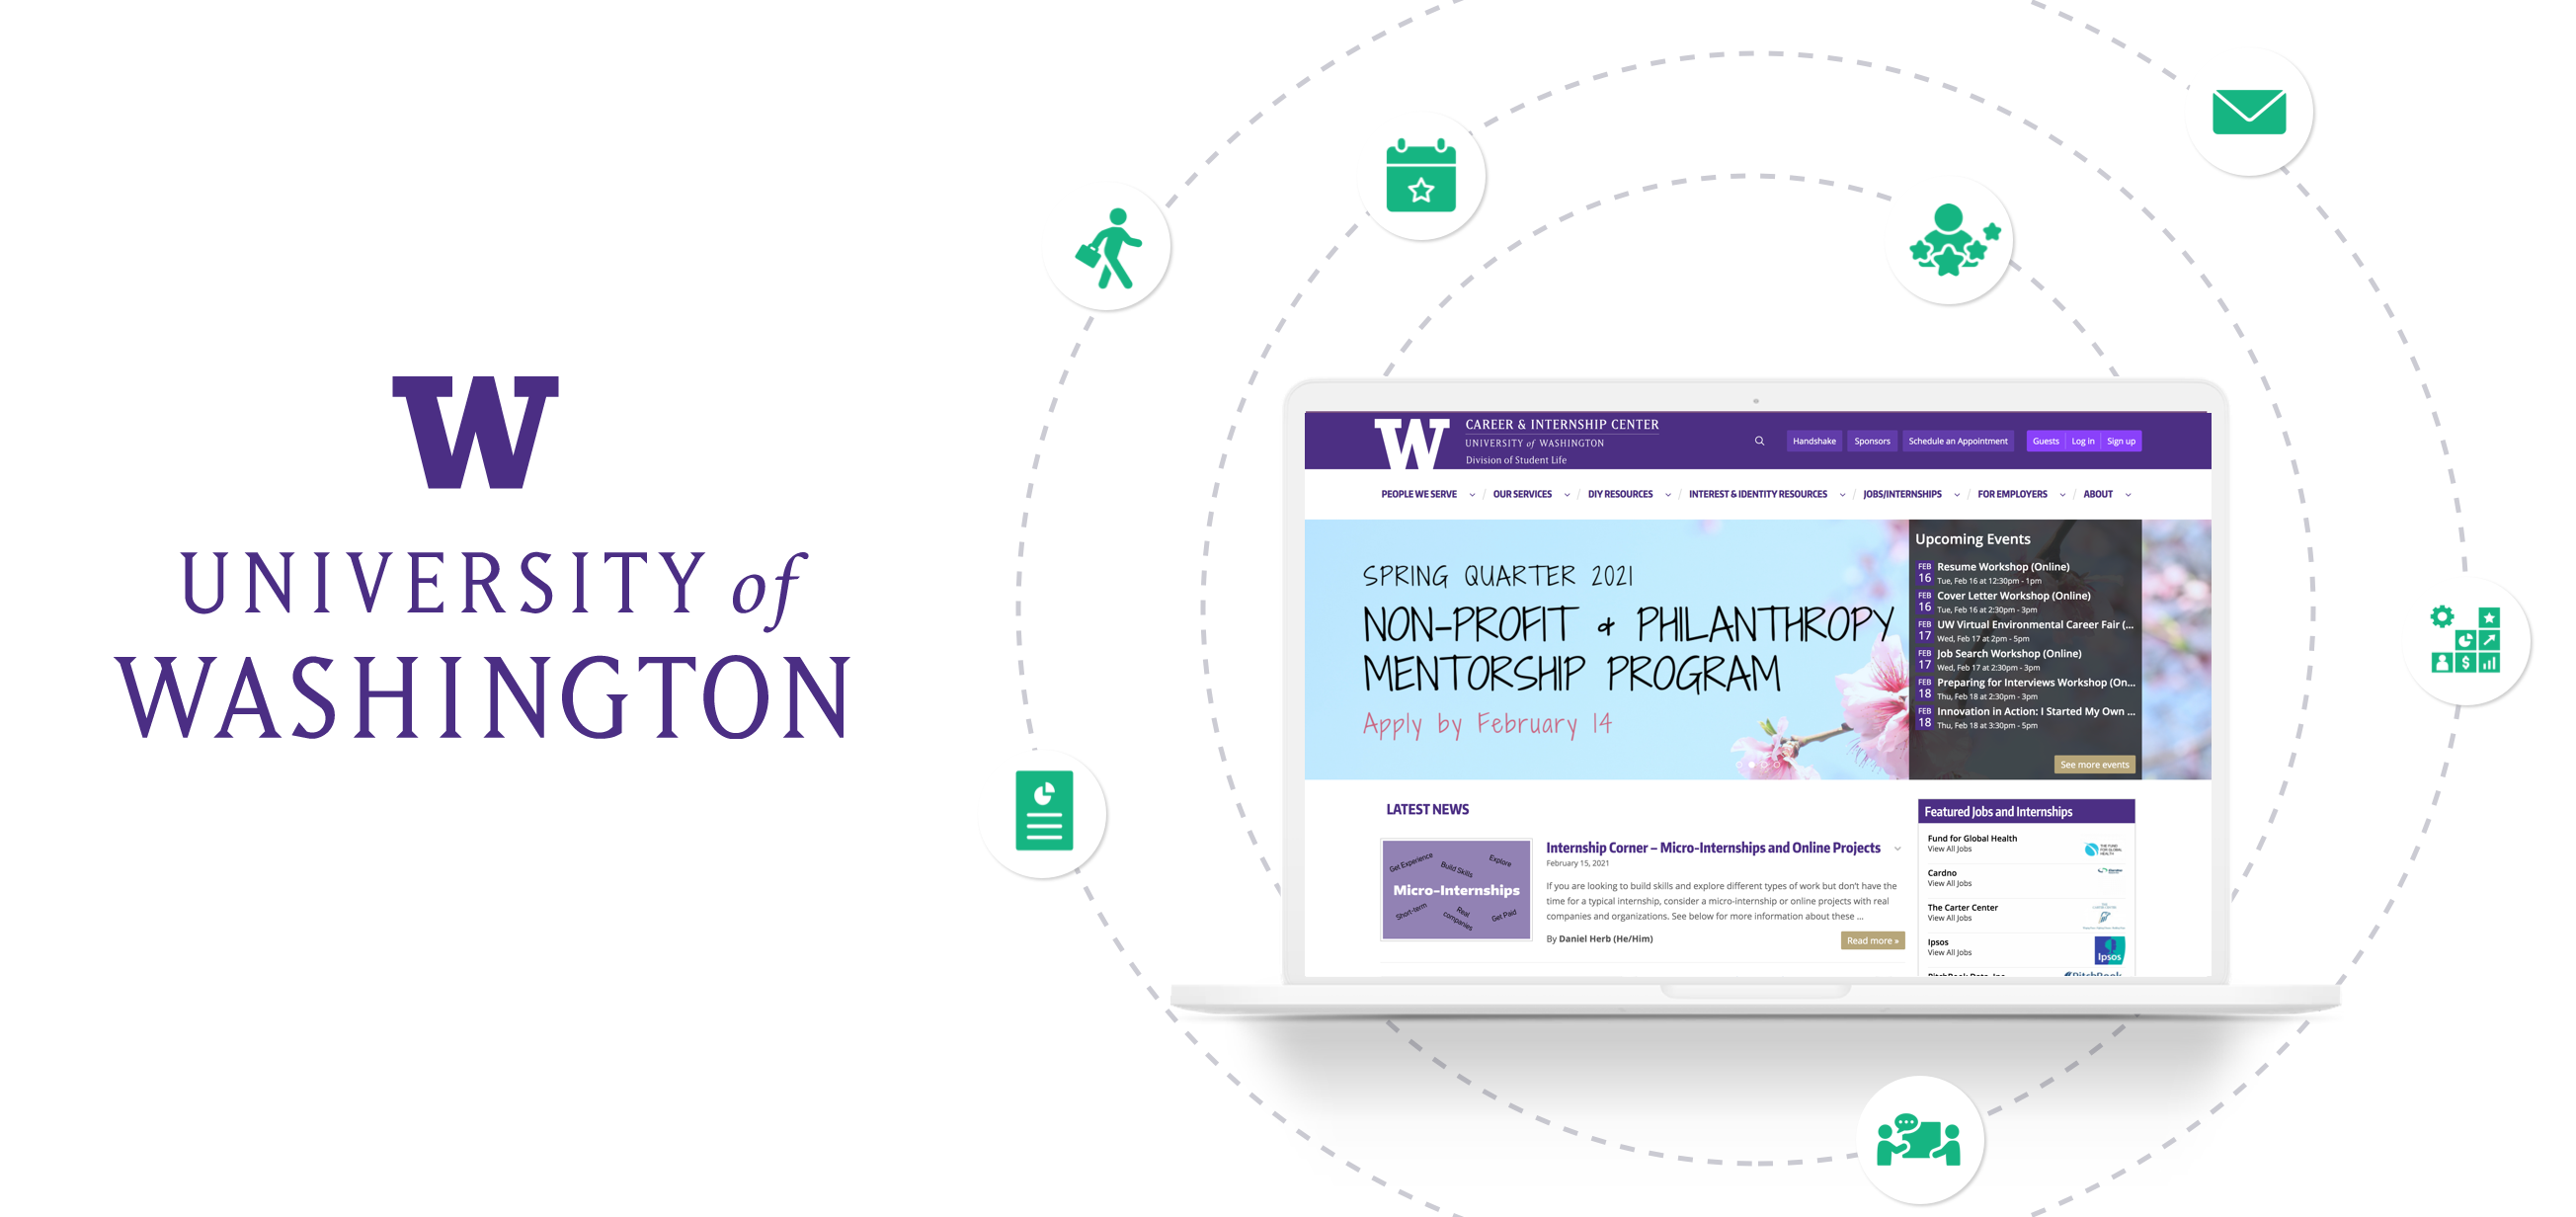 How University of Washington Increased Community Pageviews by 533%